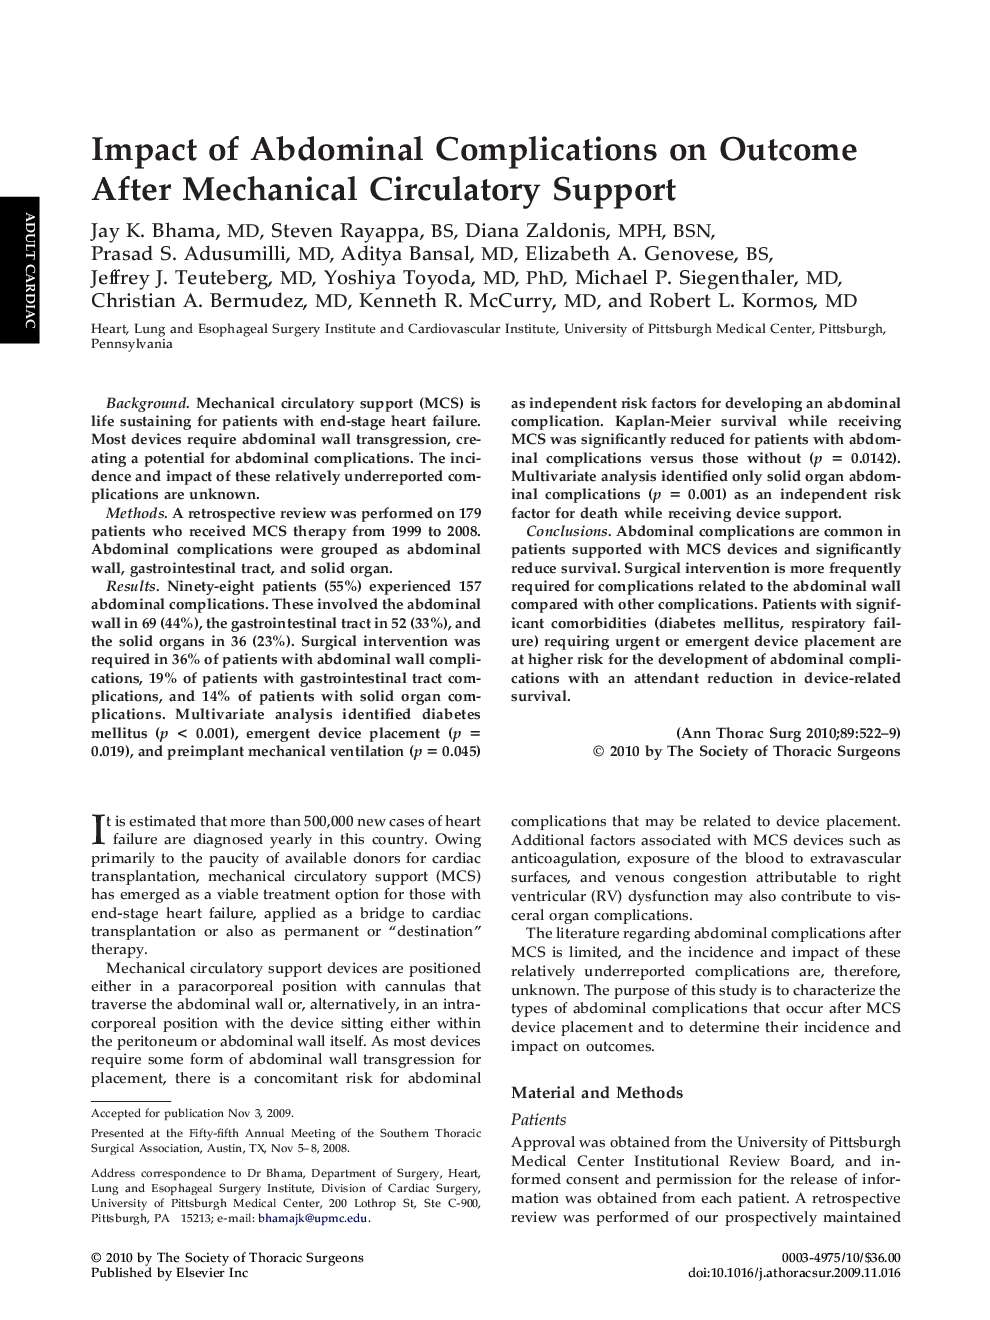 Impact of Abdominal Complications on Outcome After Mechanical Circulatory Support